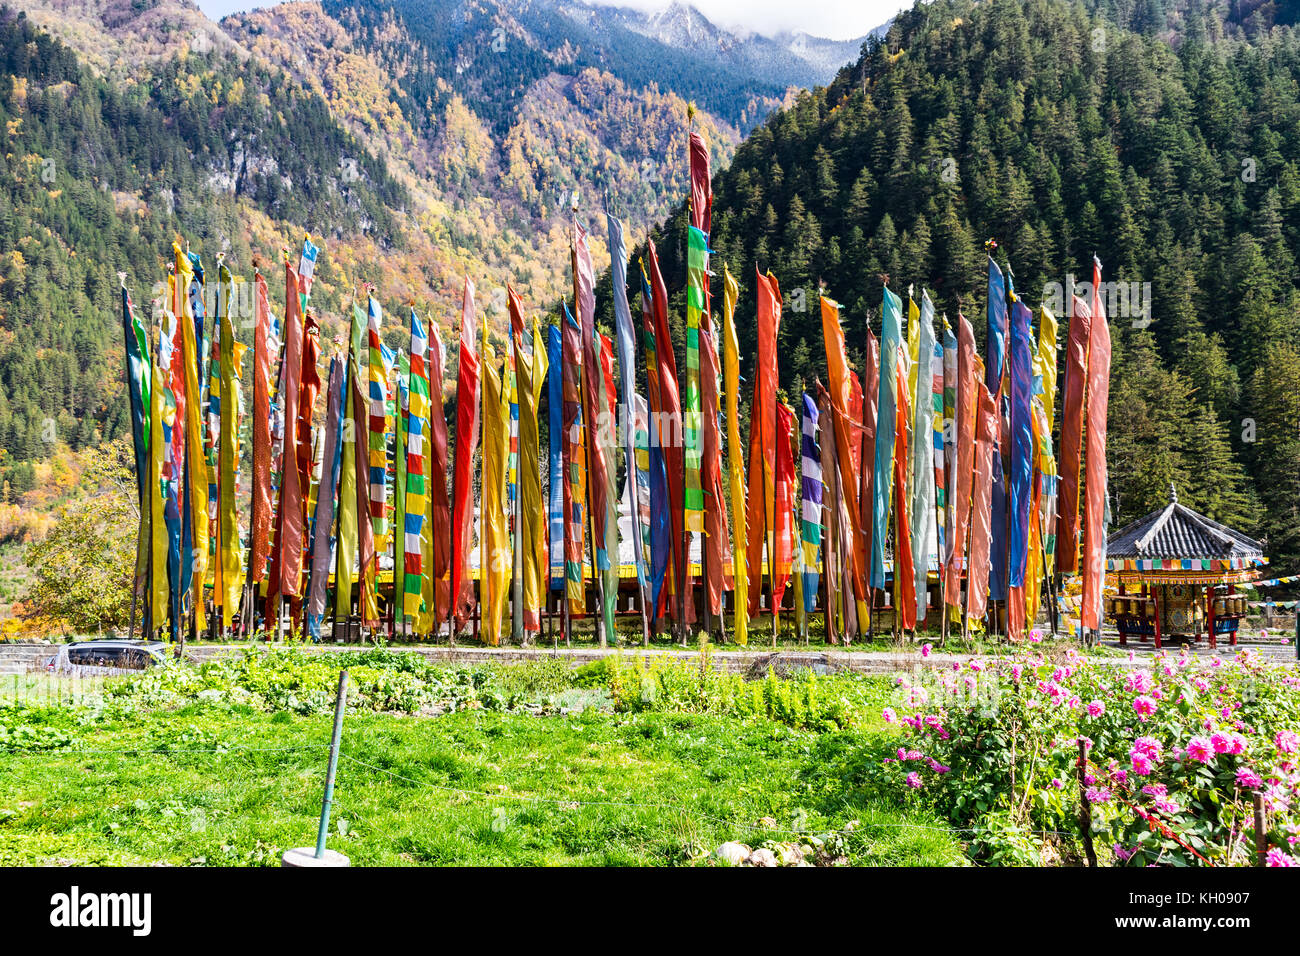 Tibetan prayer flags on poles for good luck at a village in Sichuan province, China Stock Photo